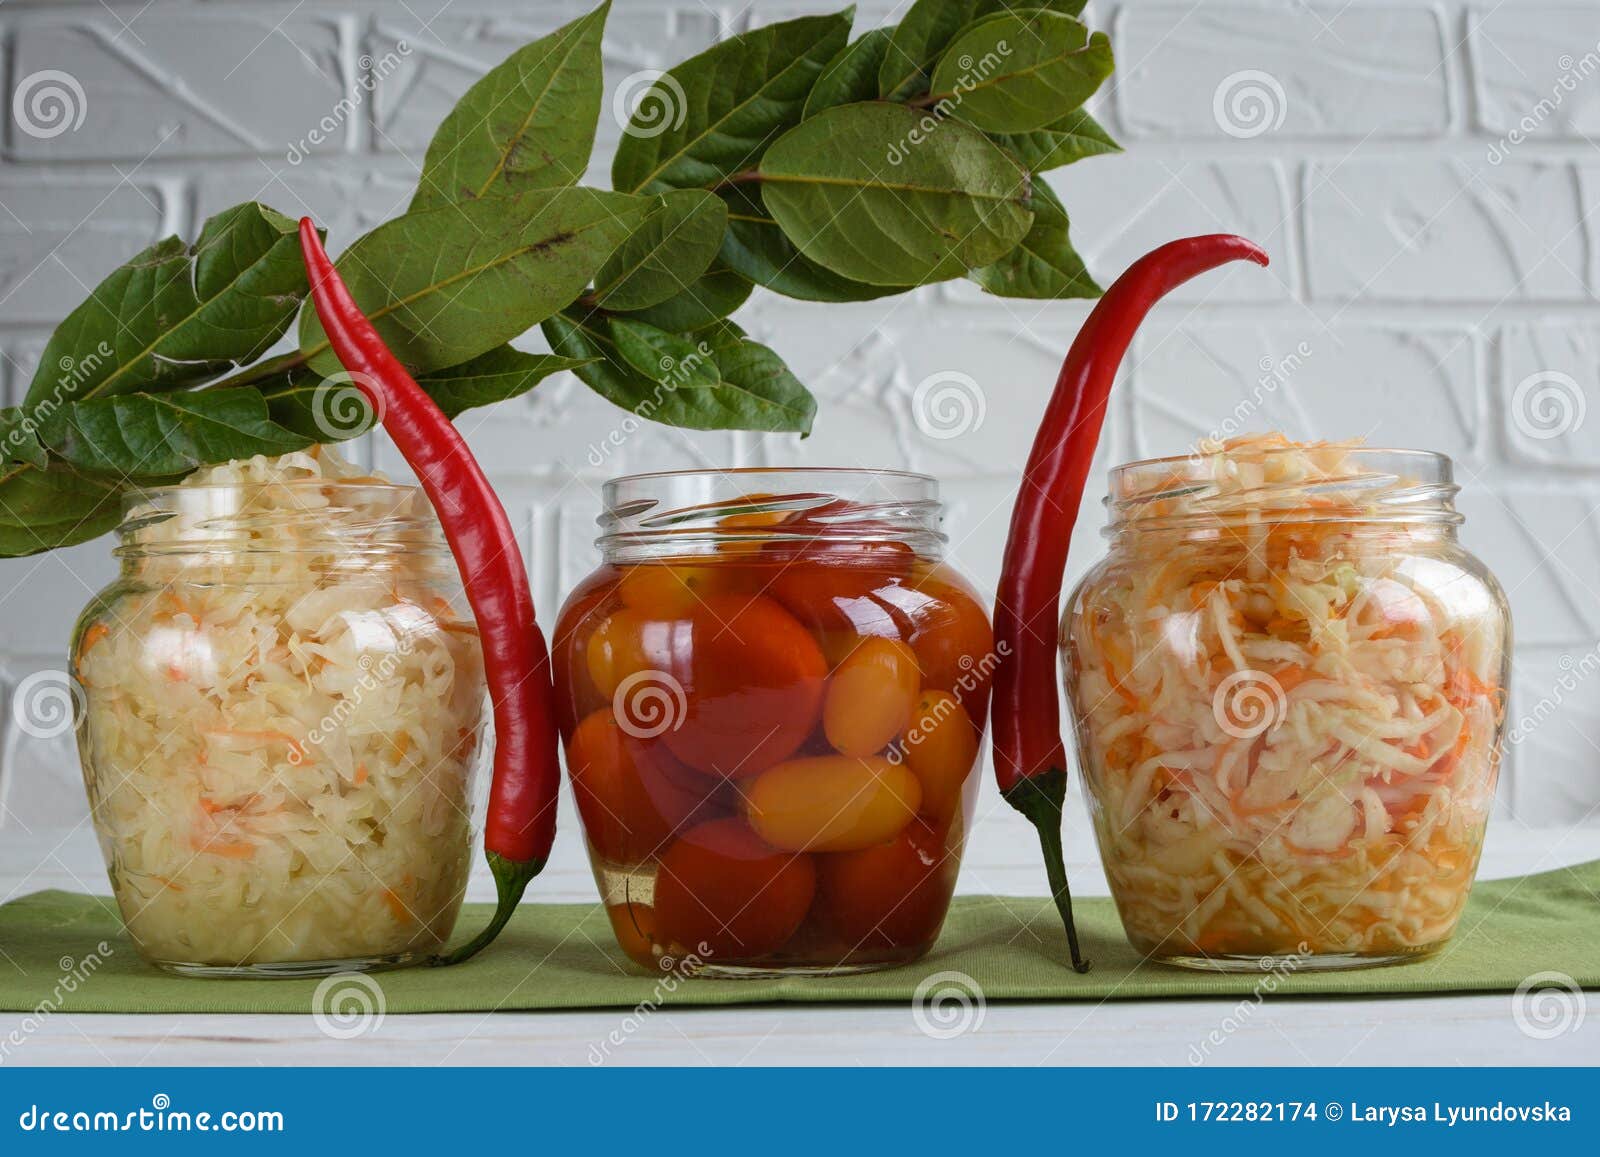 fermented foods. sauerkraut, salted tomatoes on a white background. vegetarian food